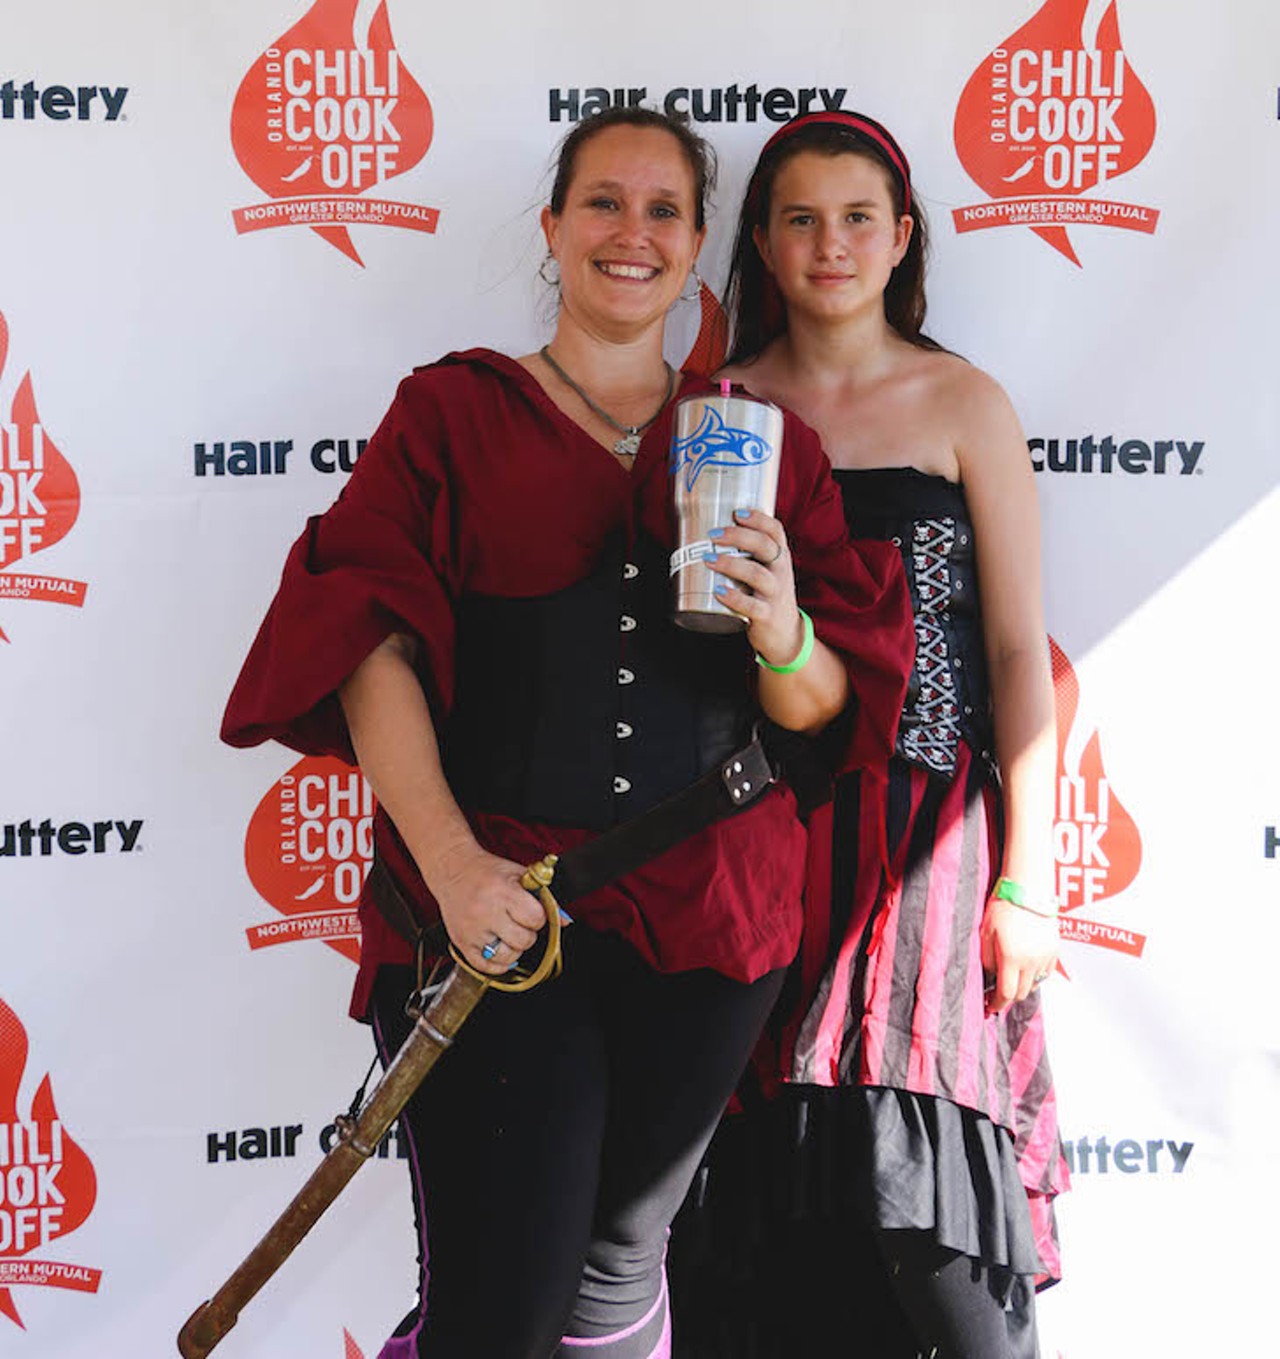 Photos from the Orlando Chili Cook-off's paparazzi zone